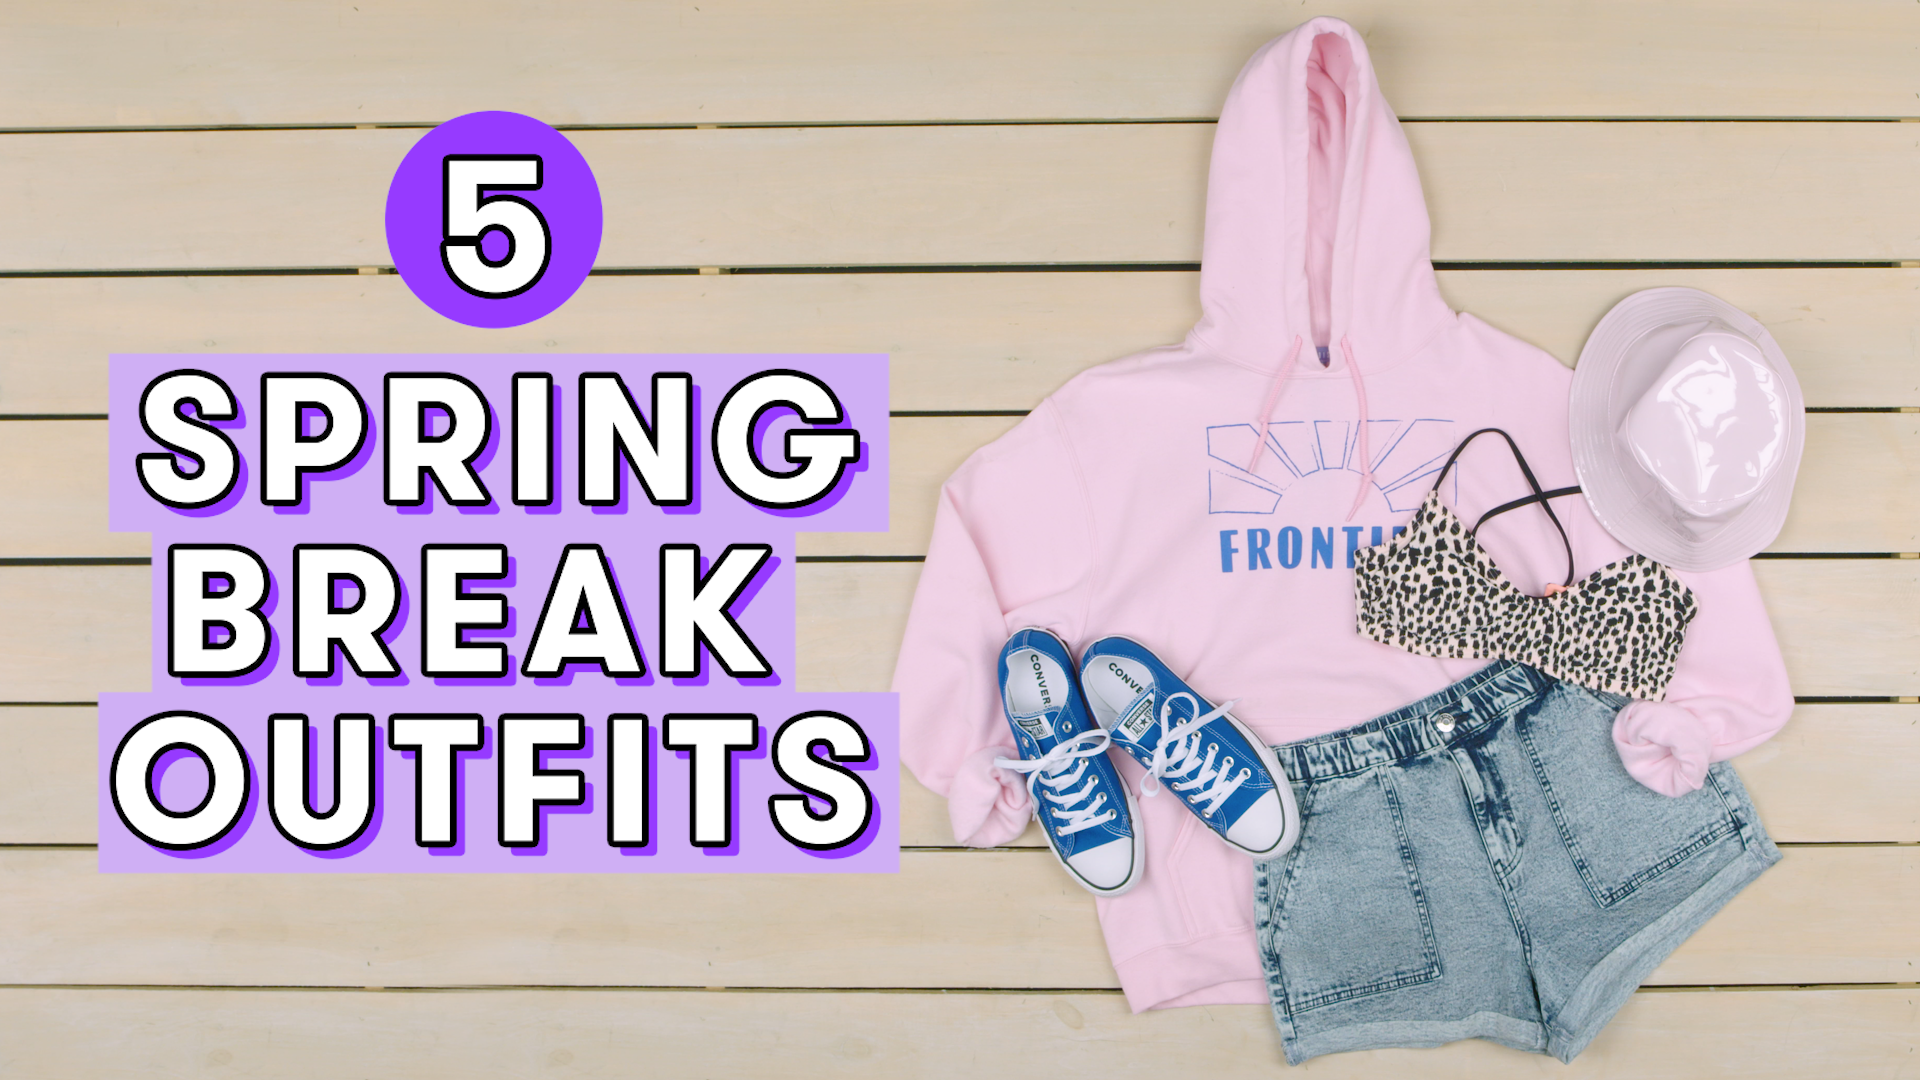 Spring Fashion Trends for Girls and Teens 2023 - New Spring Spring Fashion